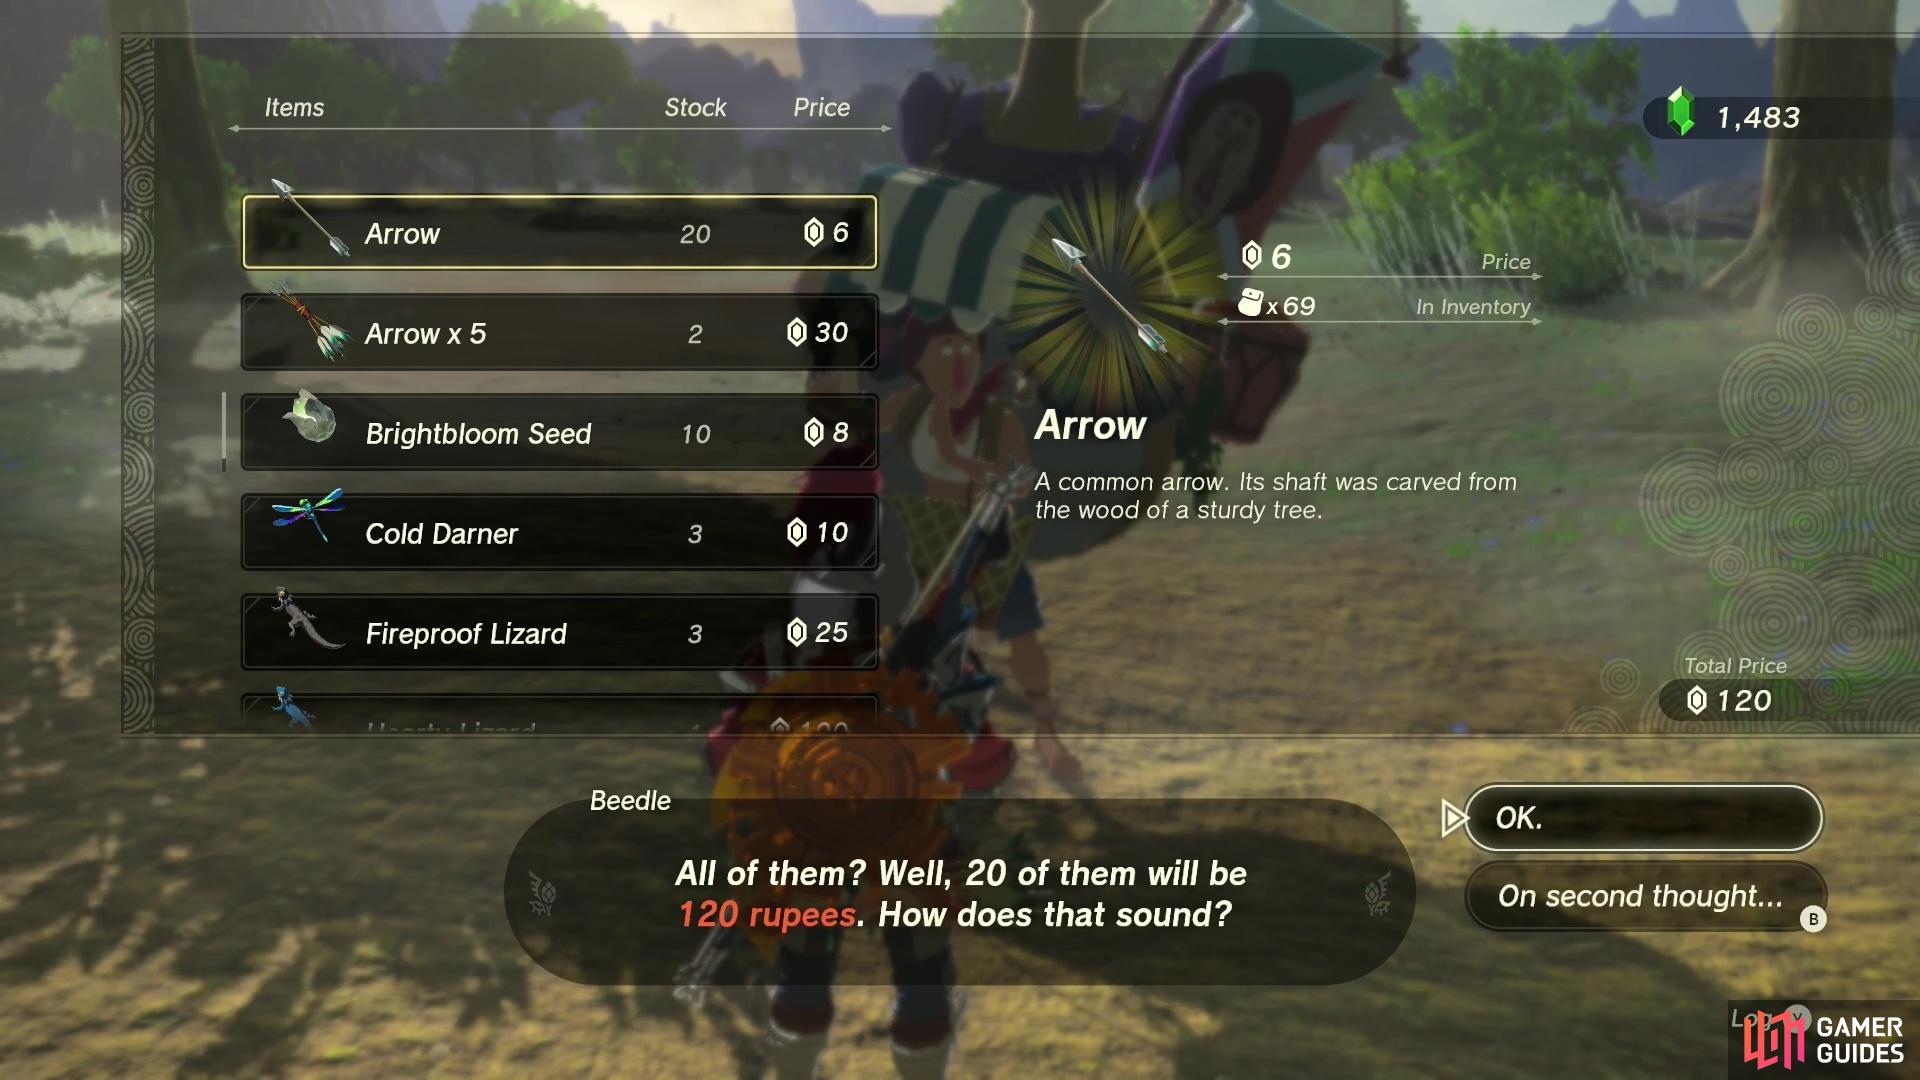 Go on a grand tour of all the stables and purchase Beedle’s arrows!